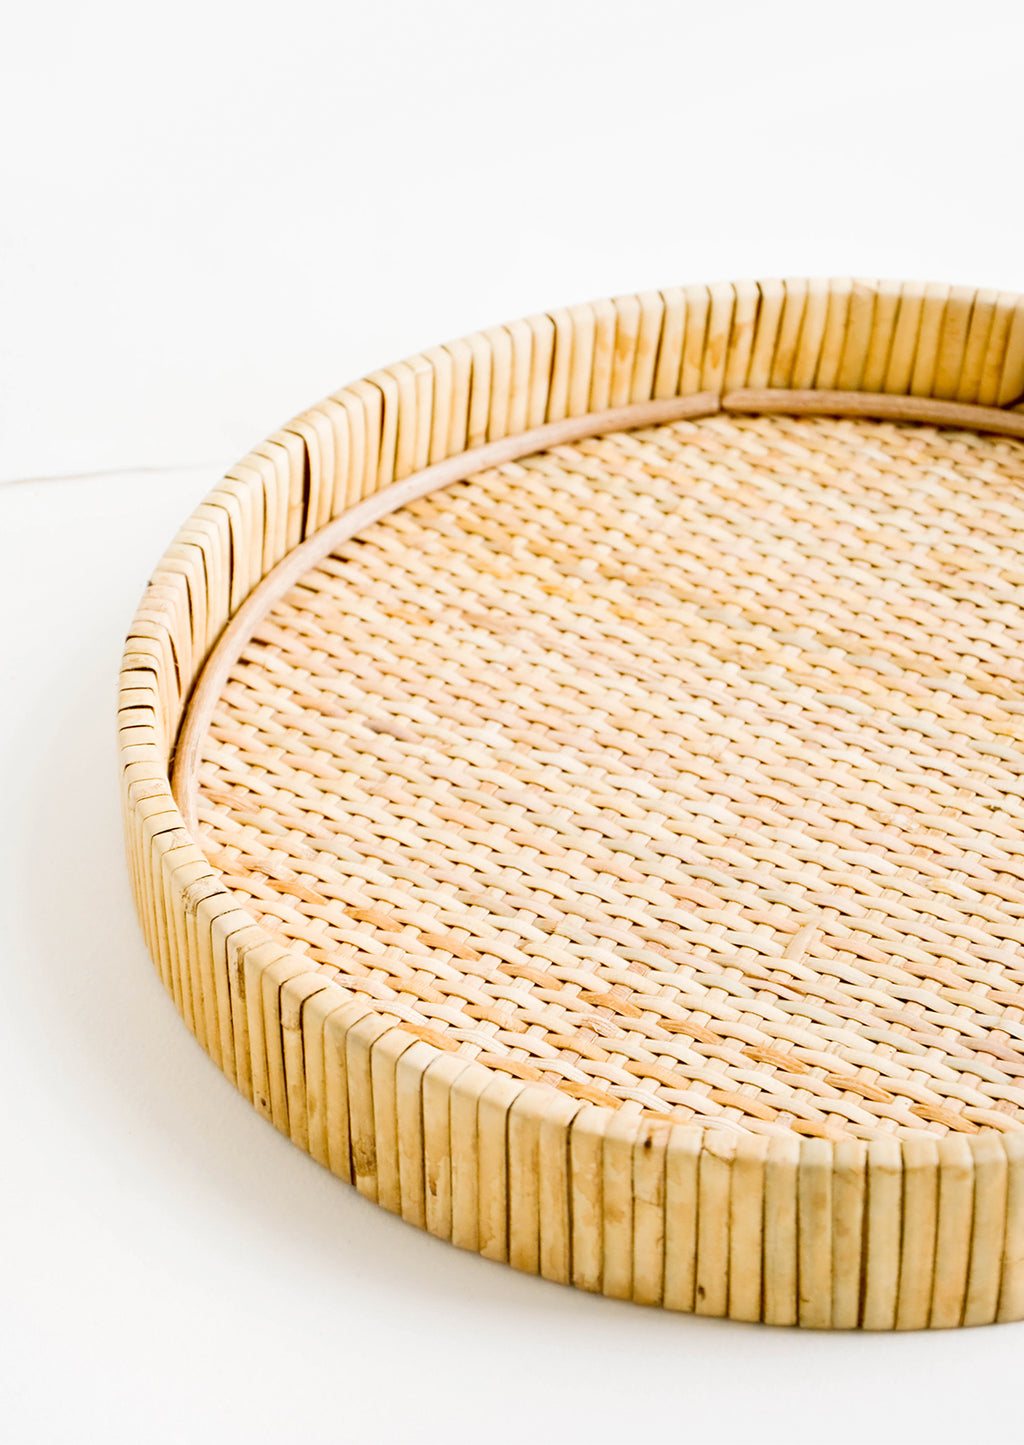 2: Round serving tray with raised rim, made from woven rattan